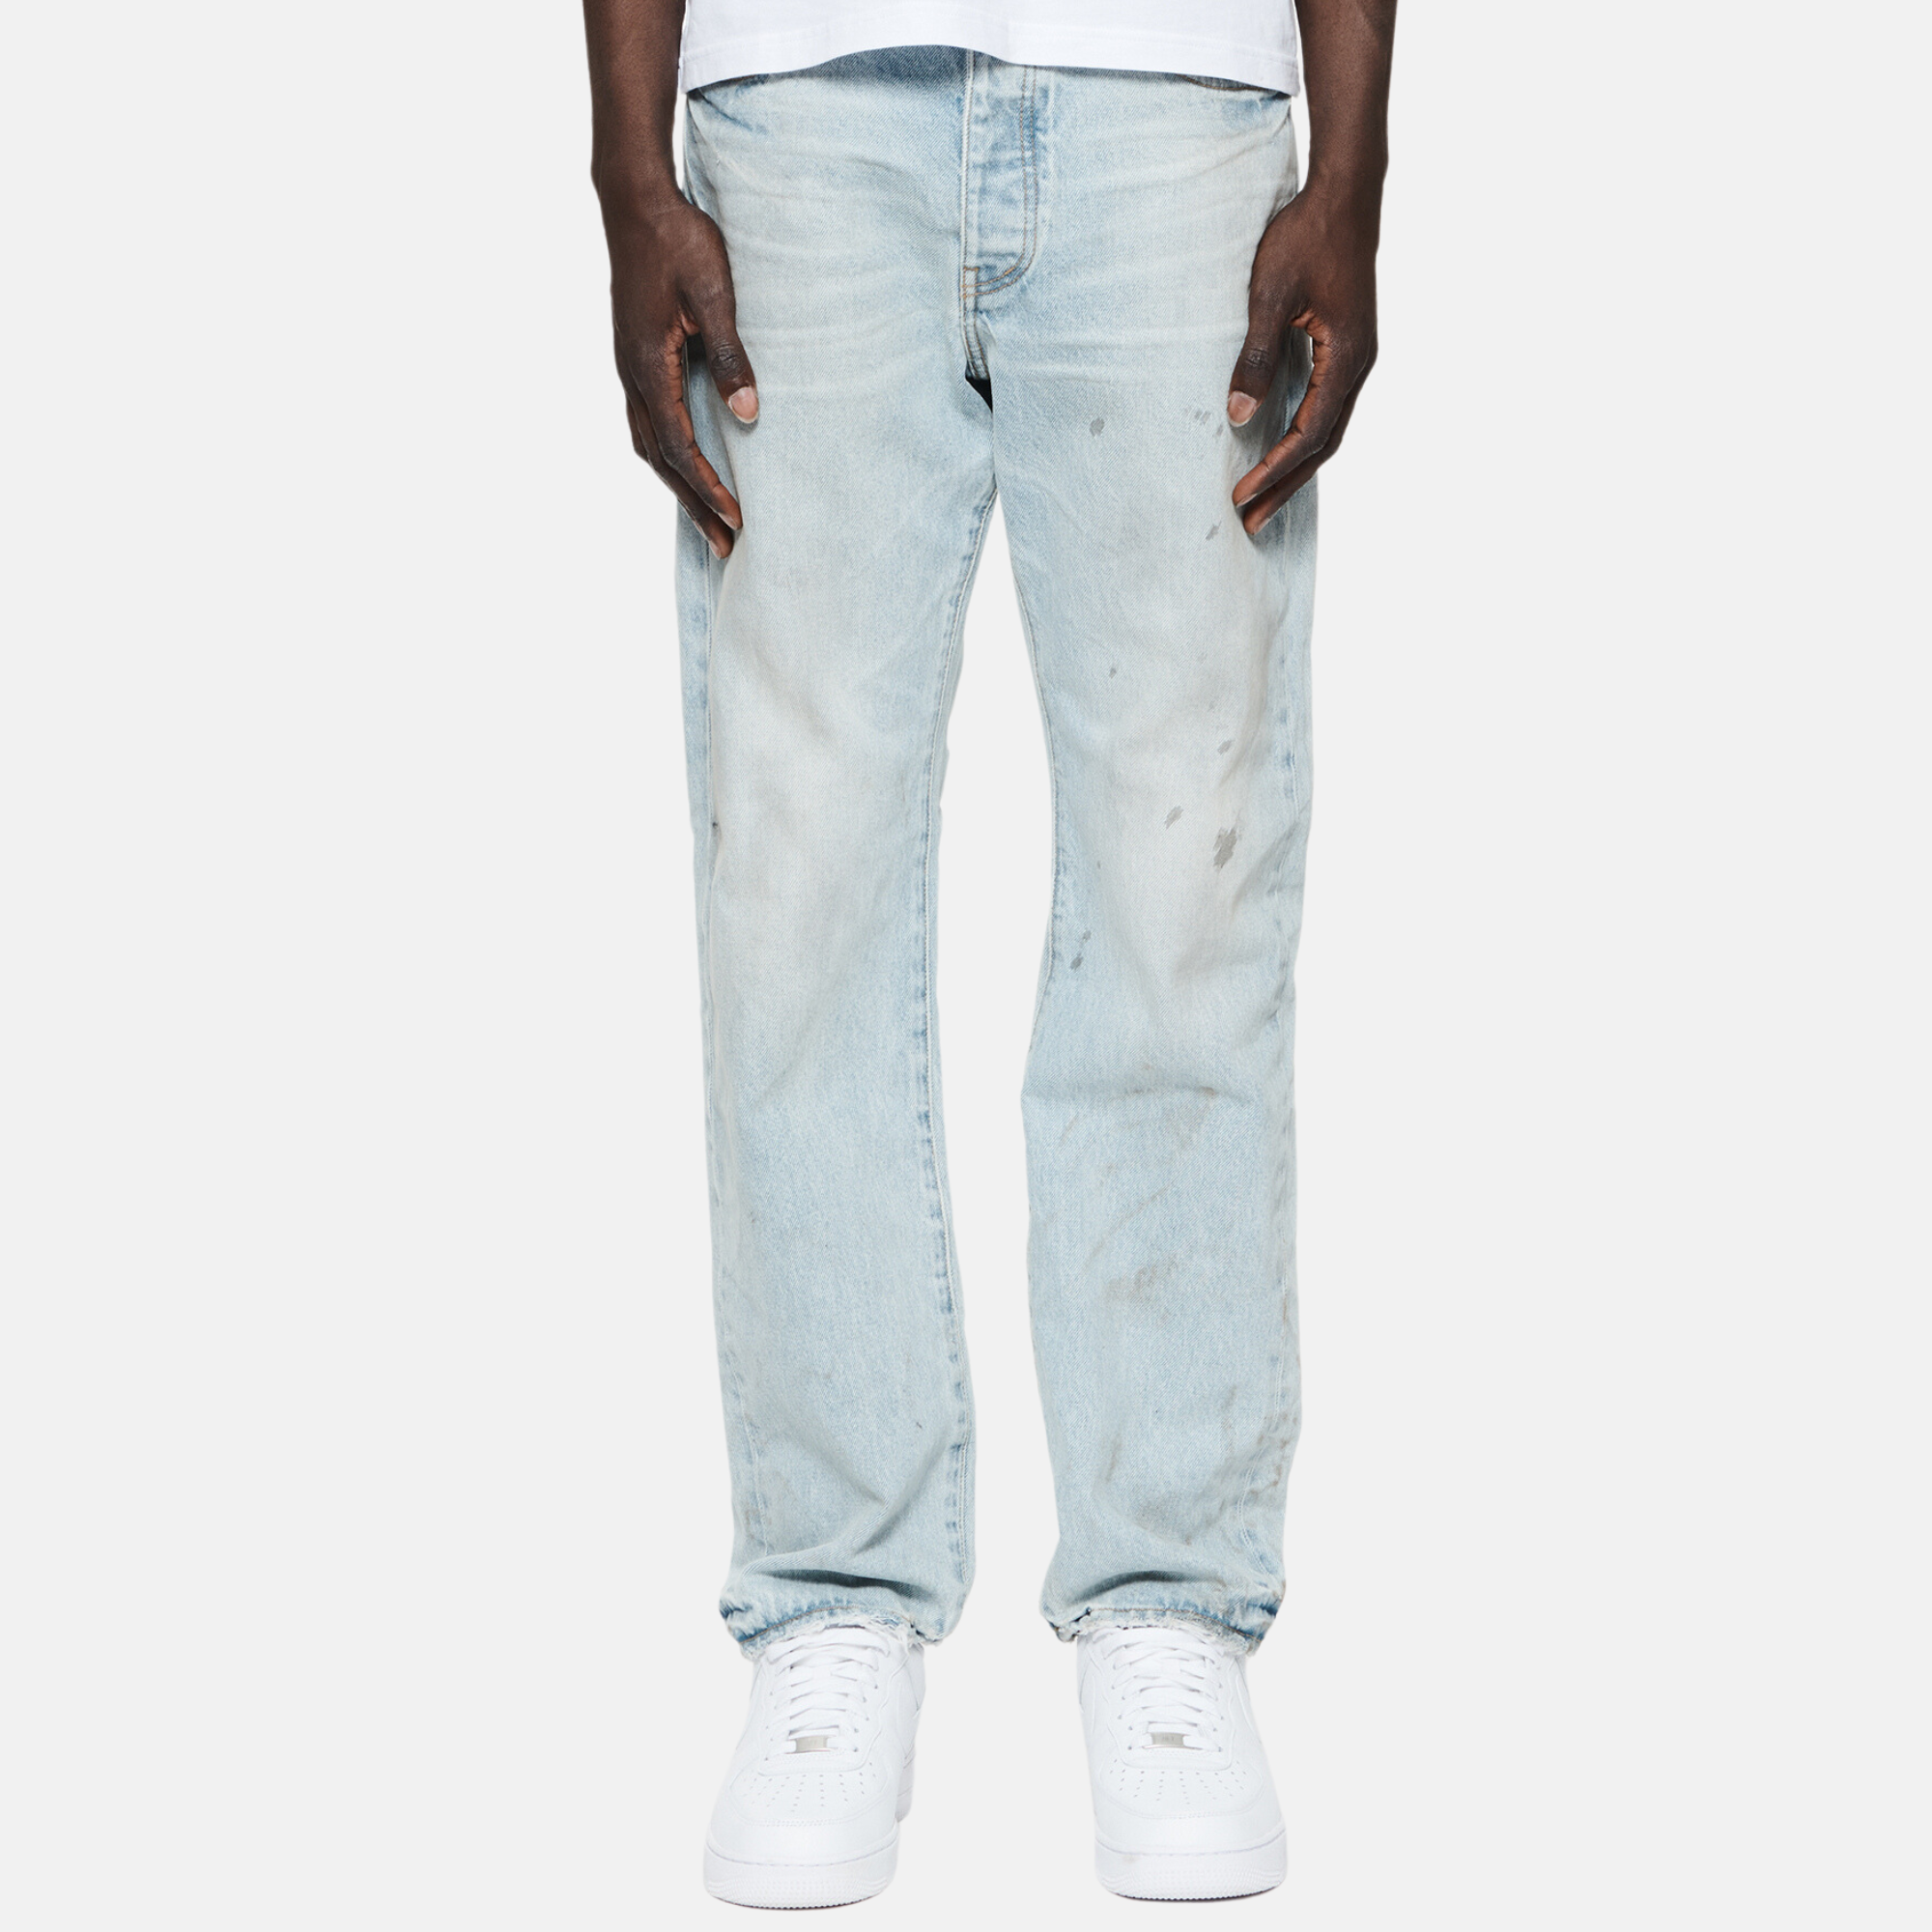 Regular Fit Stretch Jeans - FLY PAPER JEANS